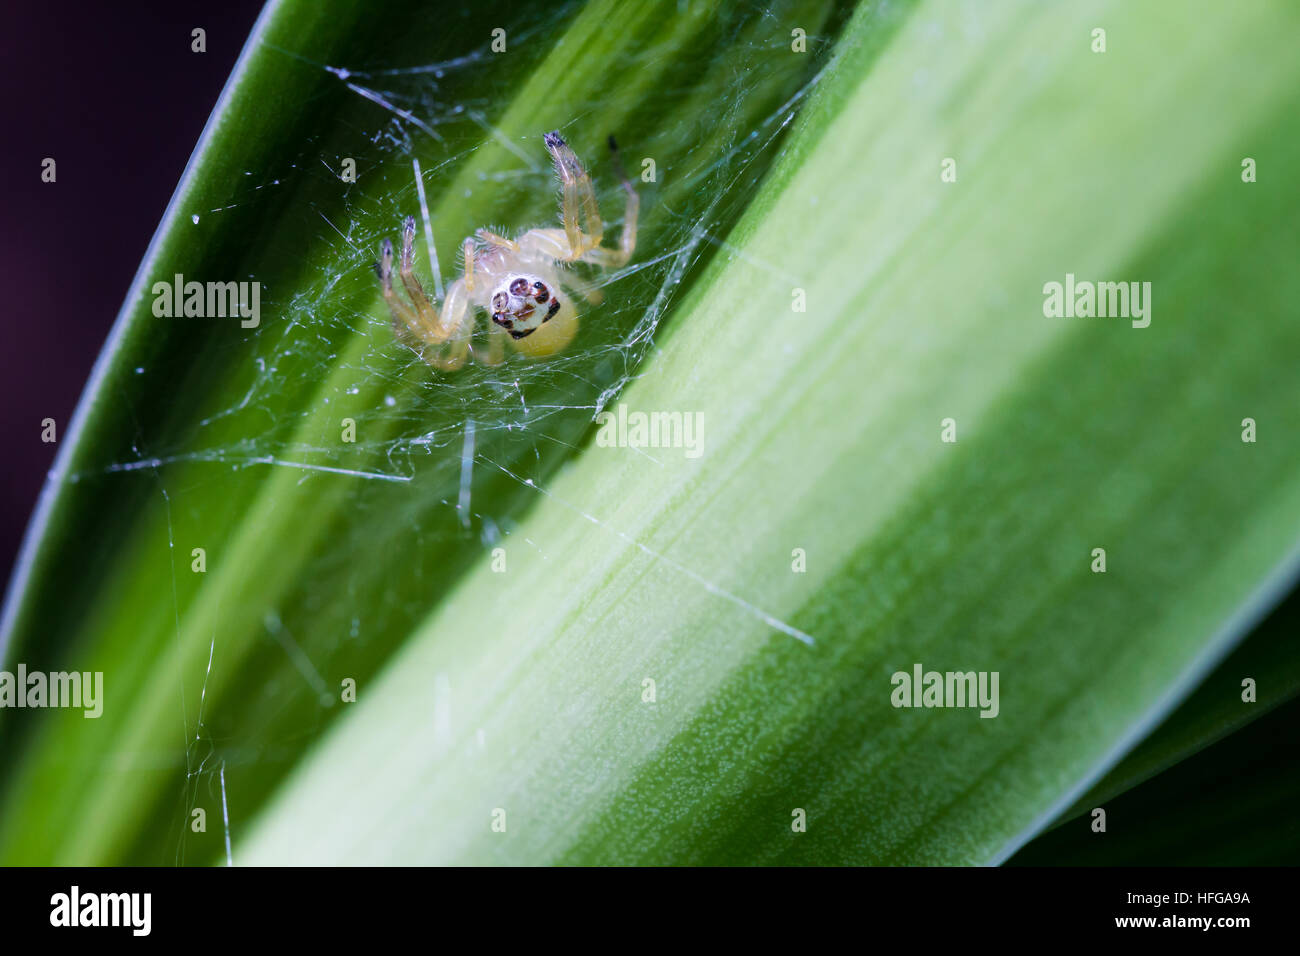 Little inverted spider spin a web on the natural green leaf. Stock Photo